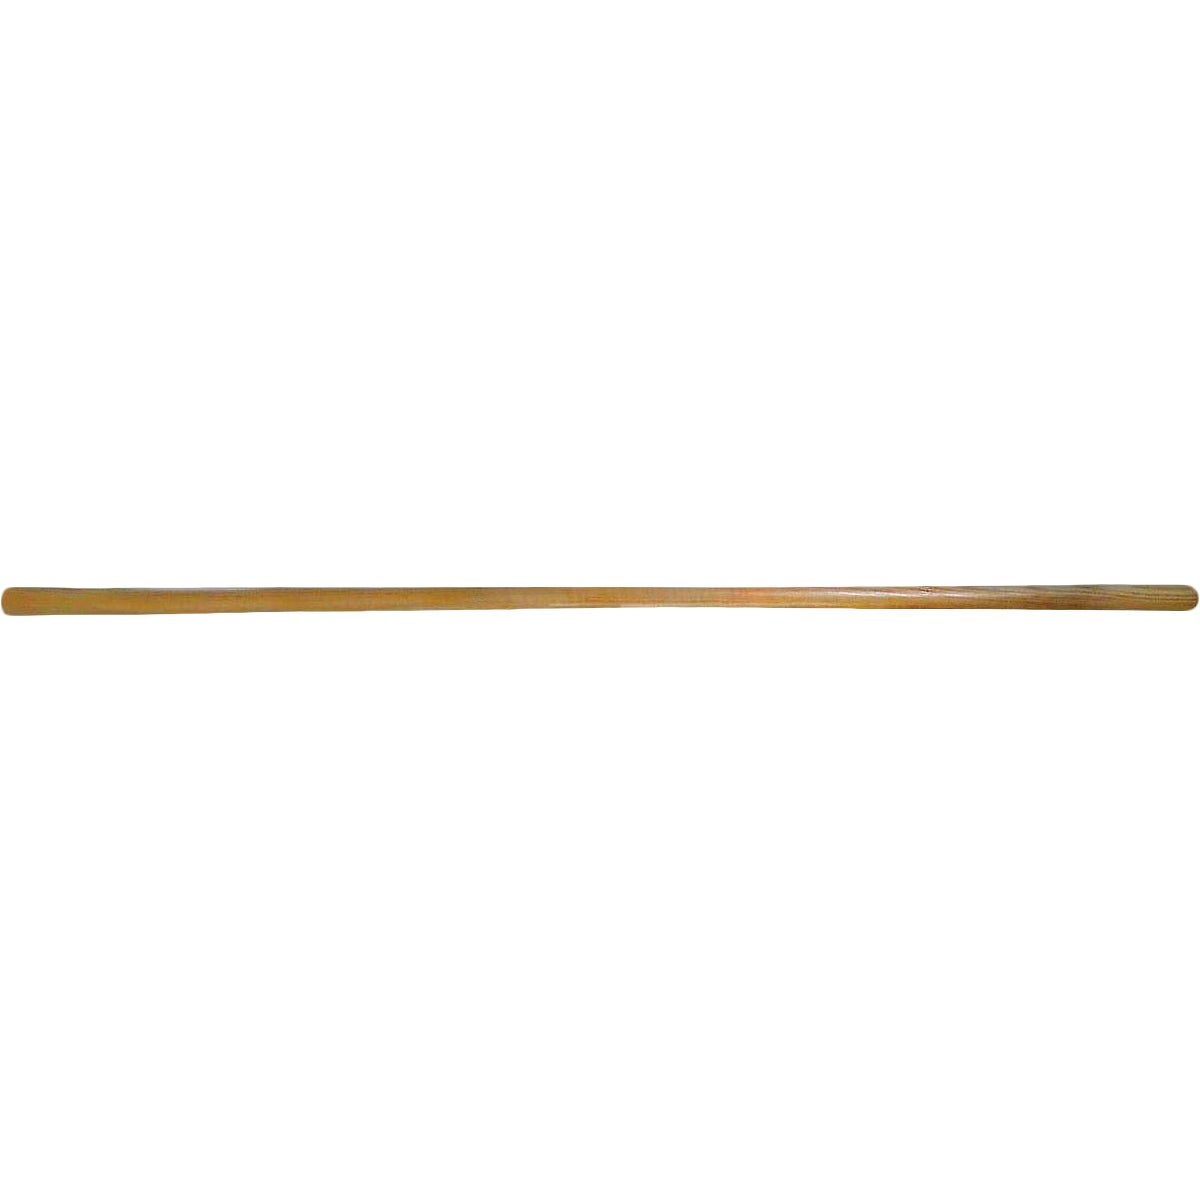 Item 706833, Replacement 54 In. wood handle for 1-3/4 In. round eye hoe and fire rake.